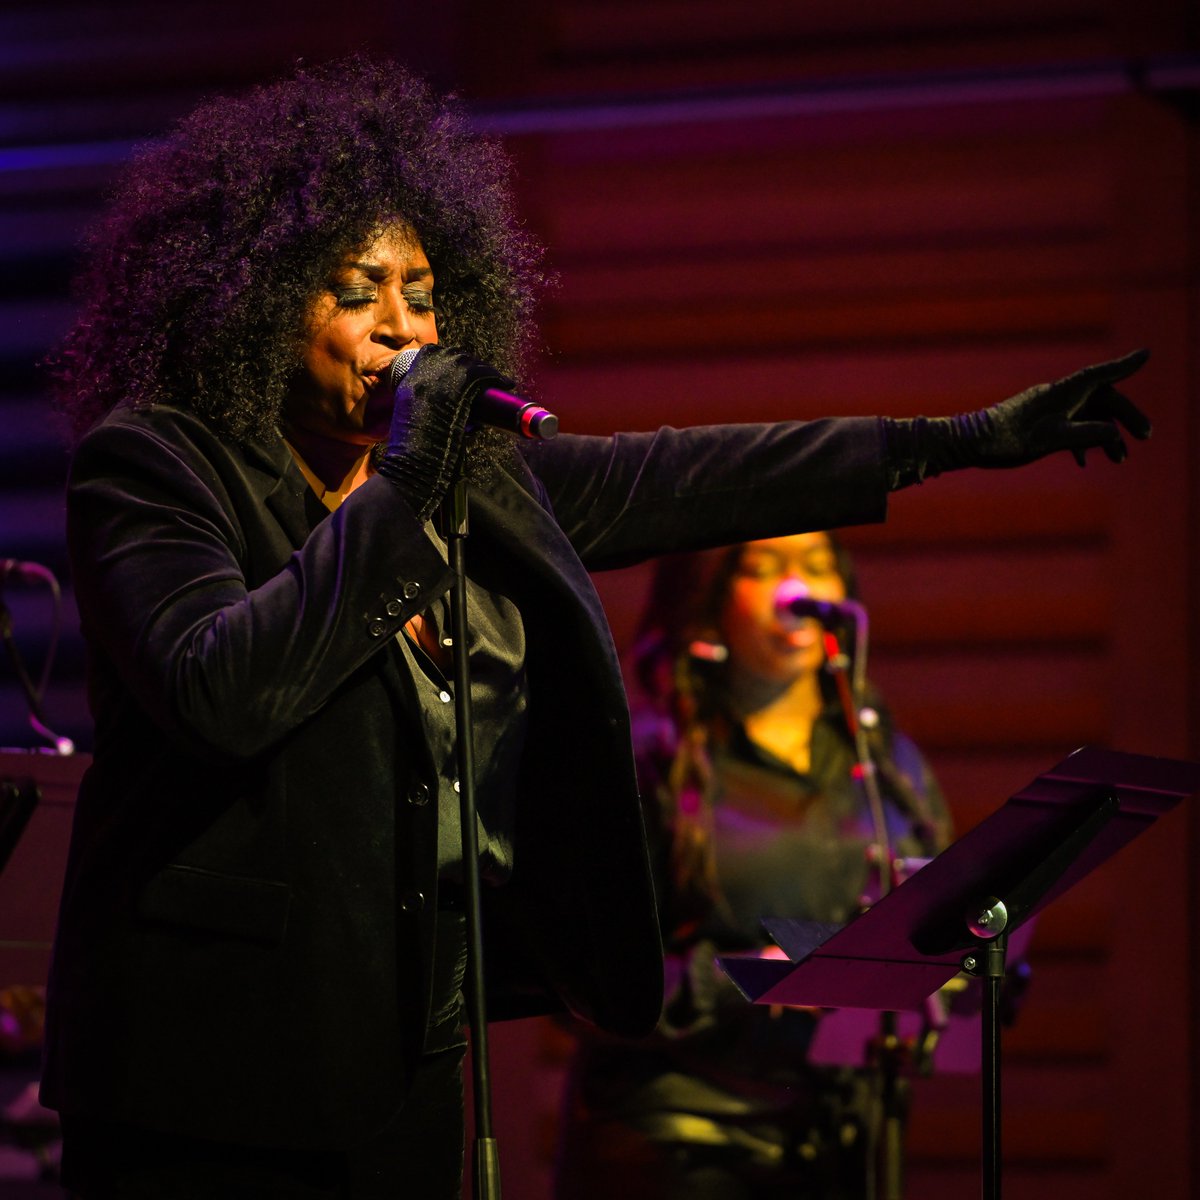 . @BlackVoicesUK & very special guest @MicaParisSoul in Hall One last Friday, providing a musical journey through the musical icons of Black Britain ❤️ 📸by Monika S. Jakubowska